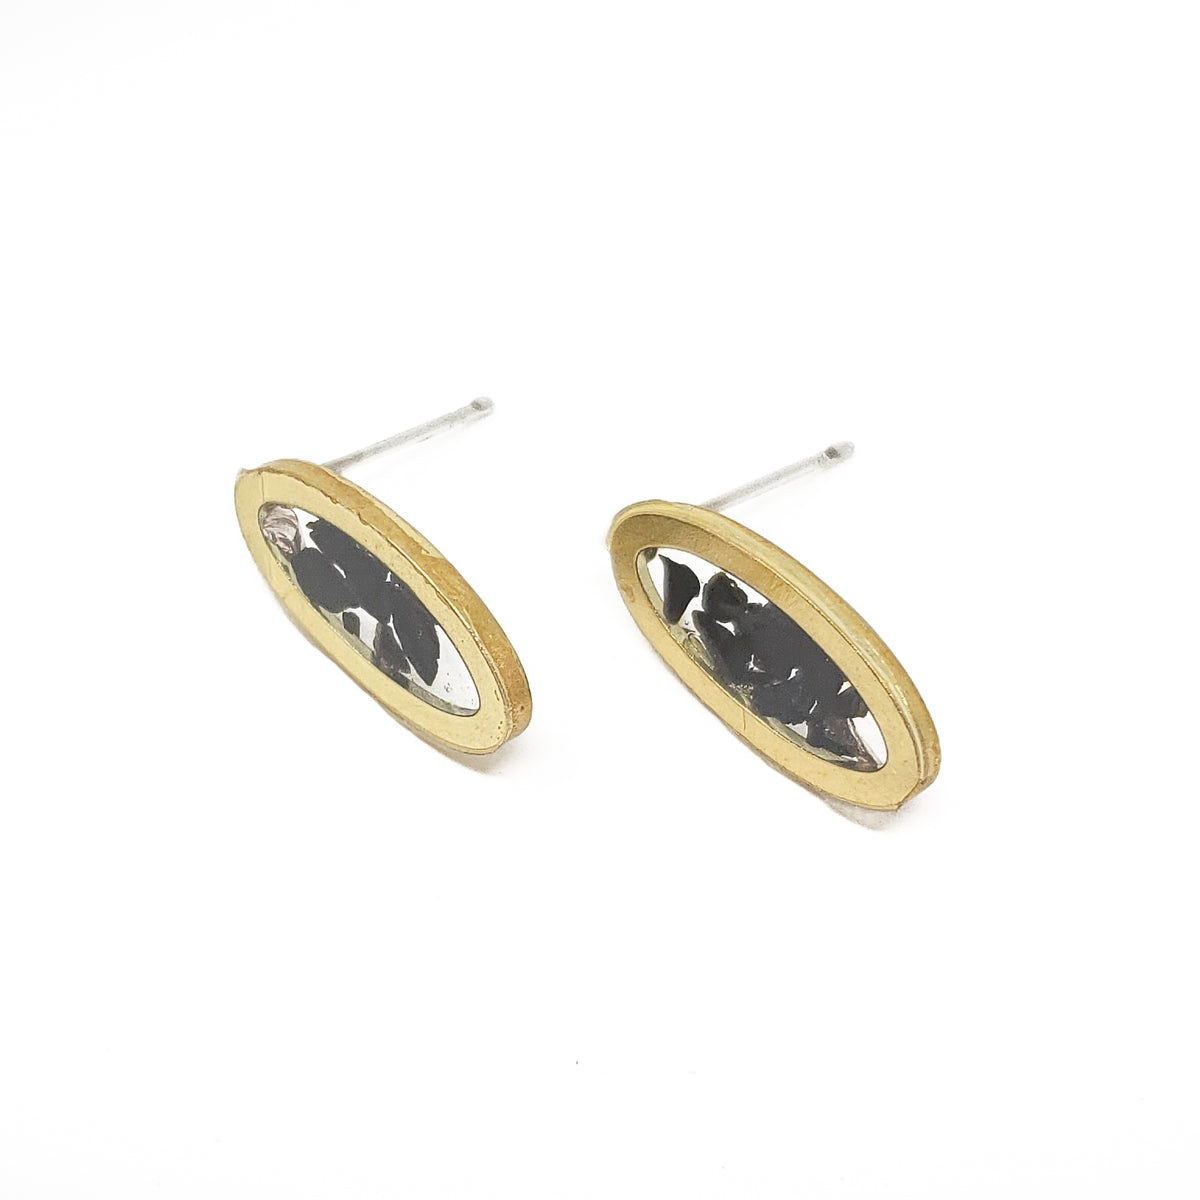 Neo Brass and Resin Stud Earrings